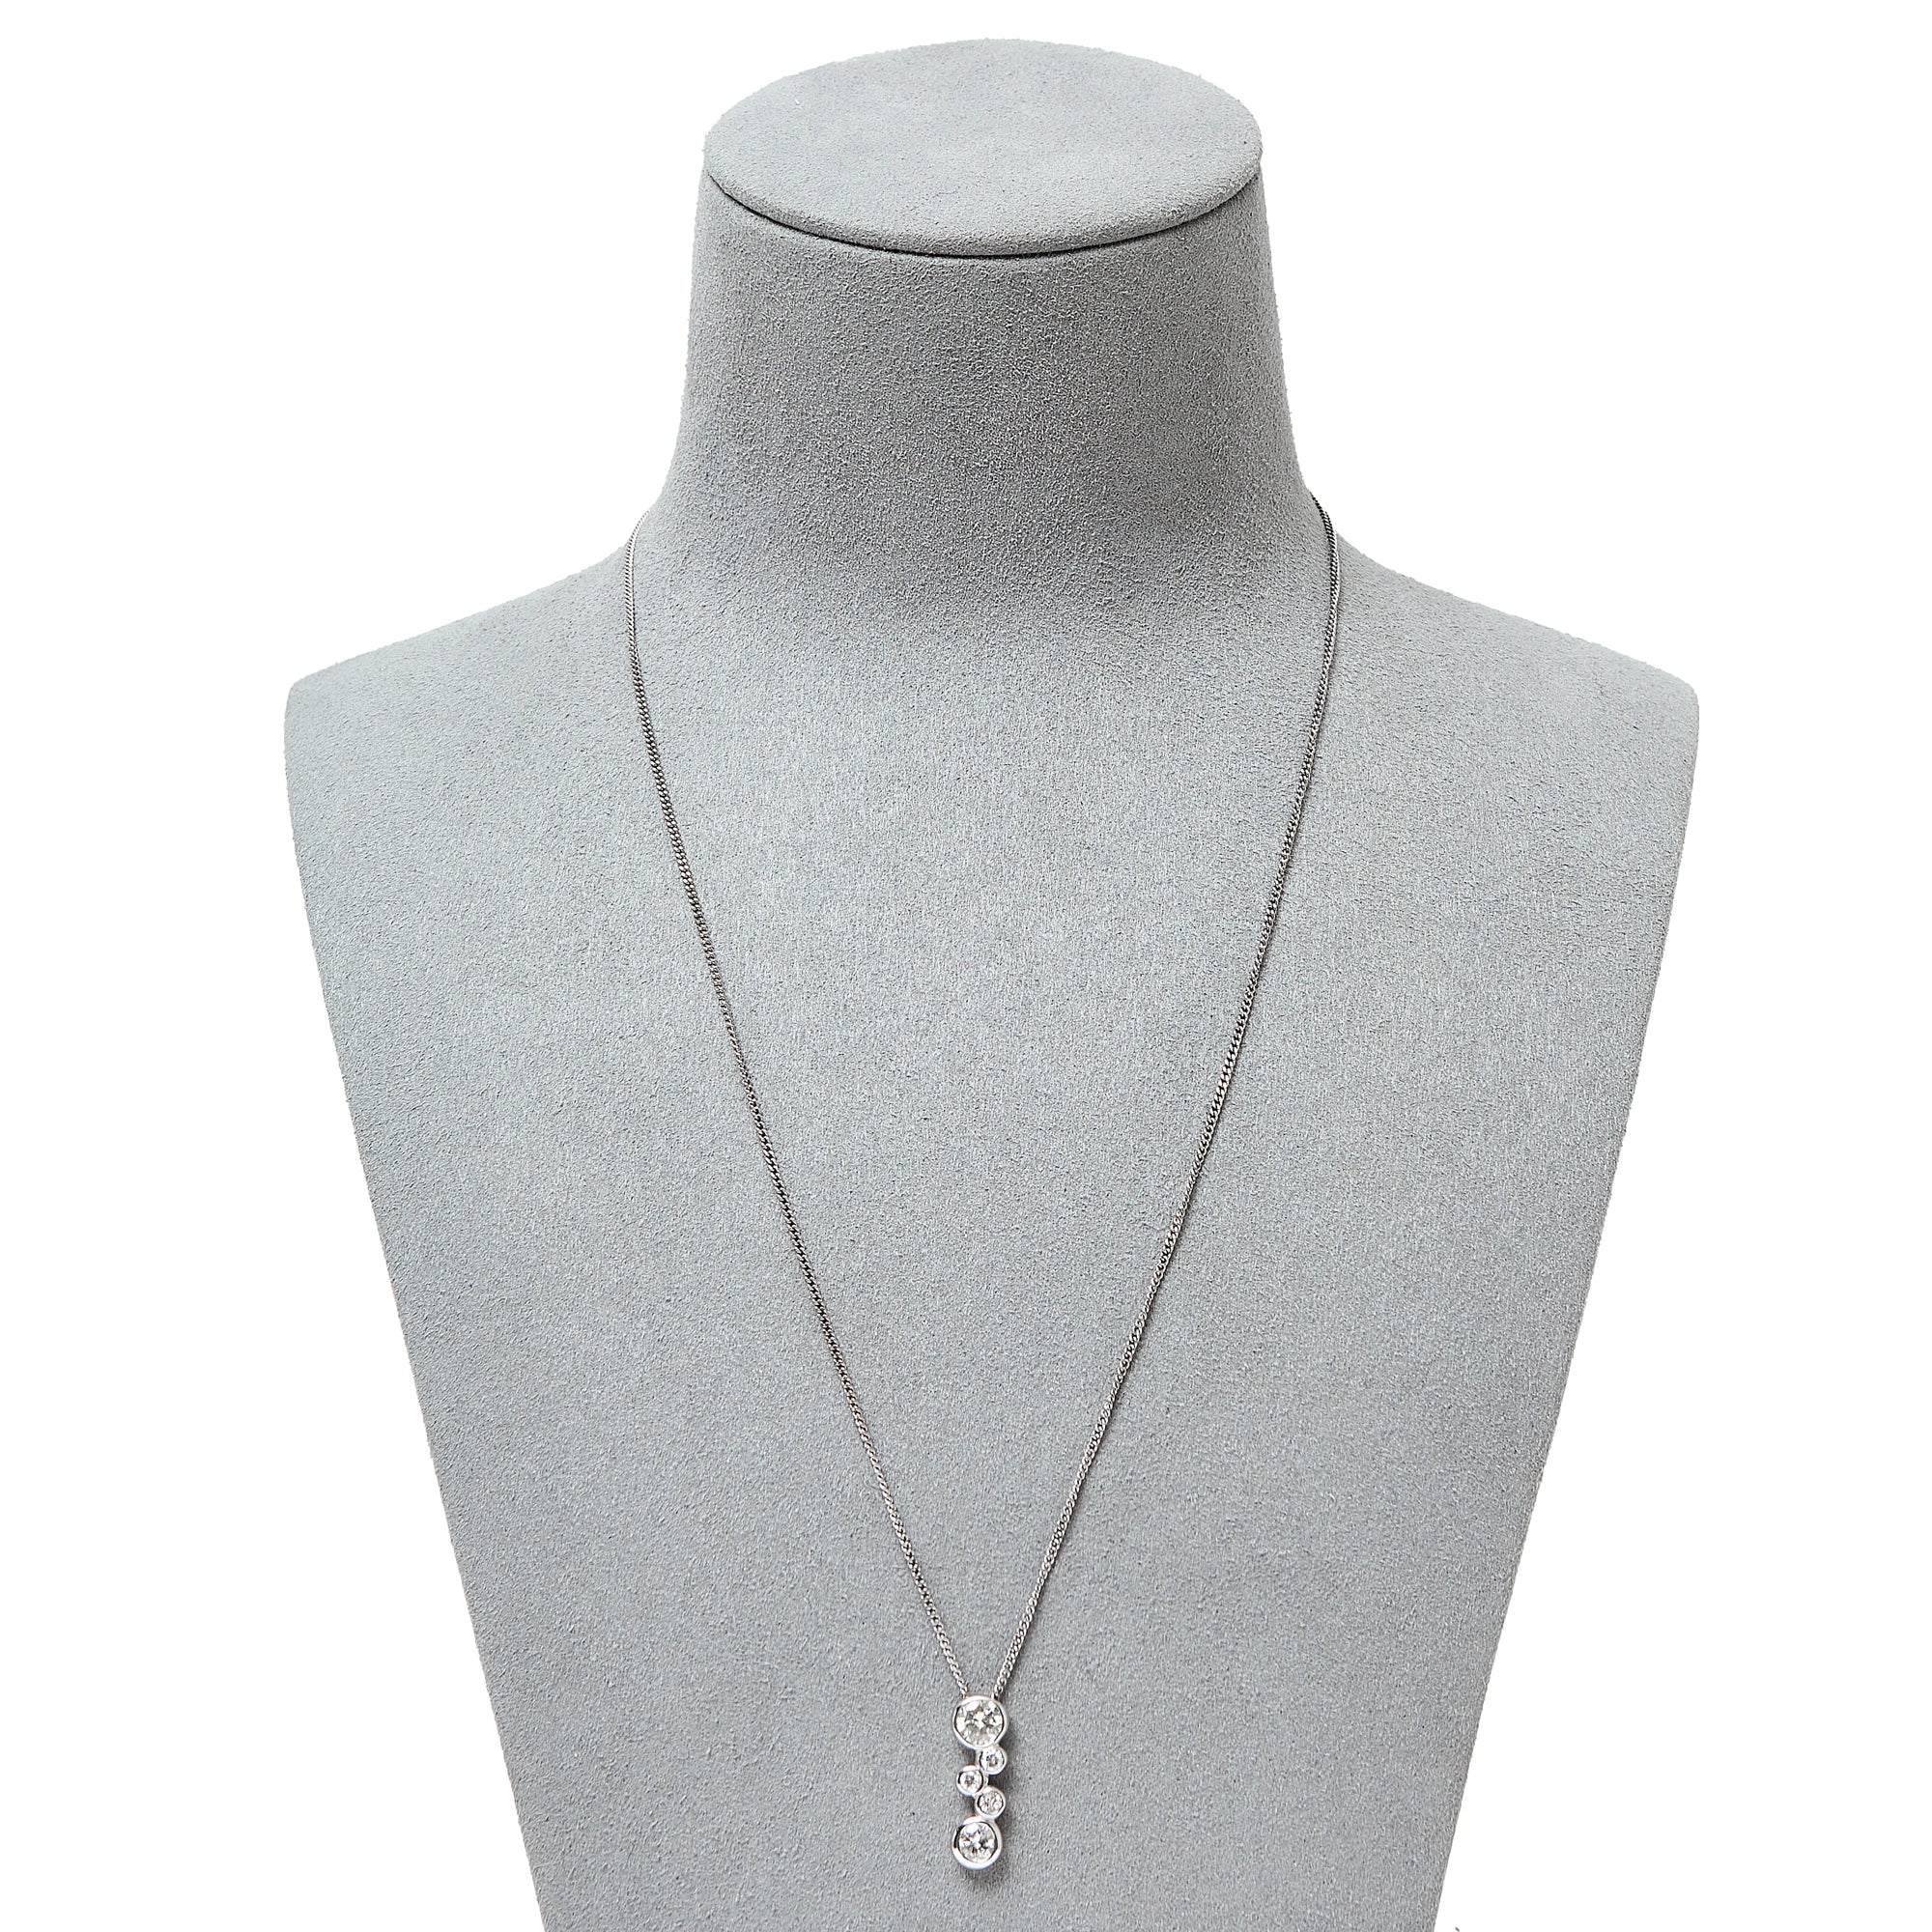 Pre-Owned White Gold 5 Diamond Drop Pendant Necklace